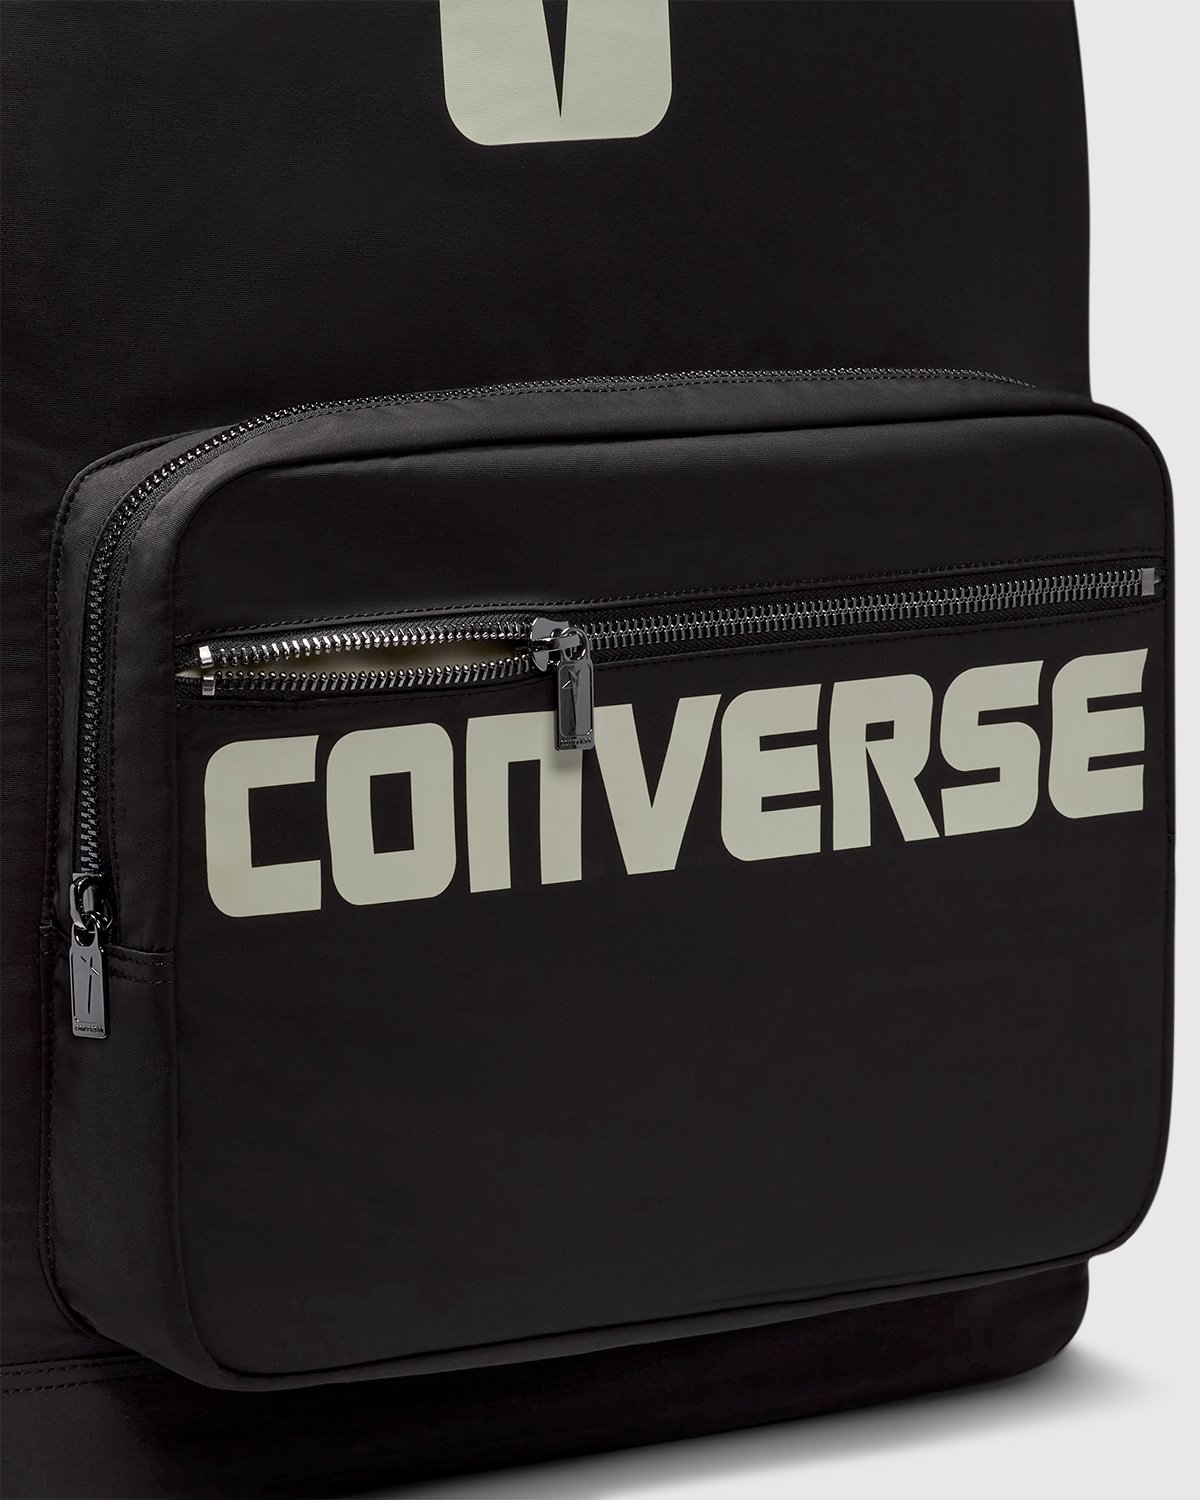 Converse x Rick Owens - Oversized Backpack Black - Accessories - Black - Image 3